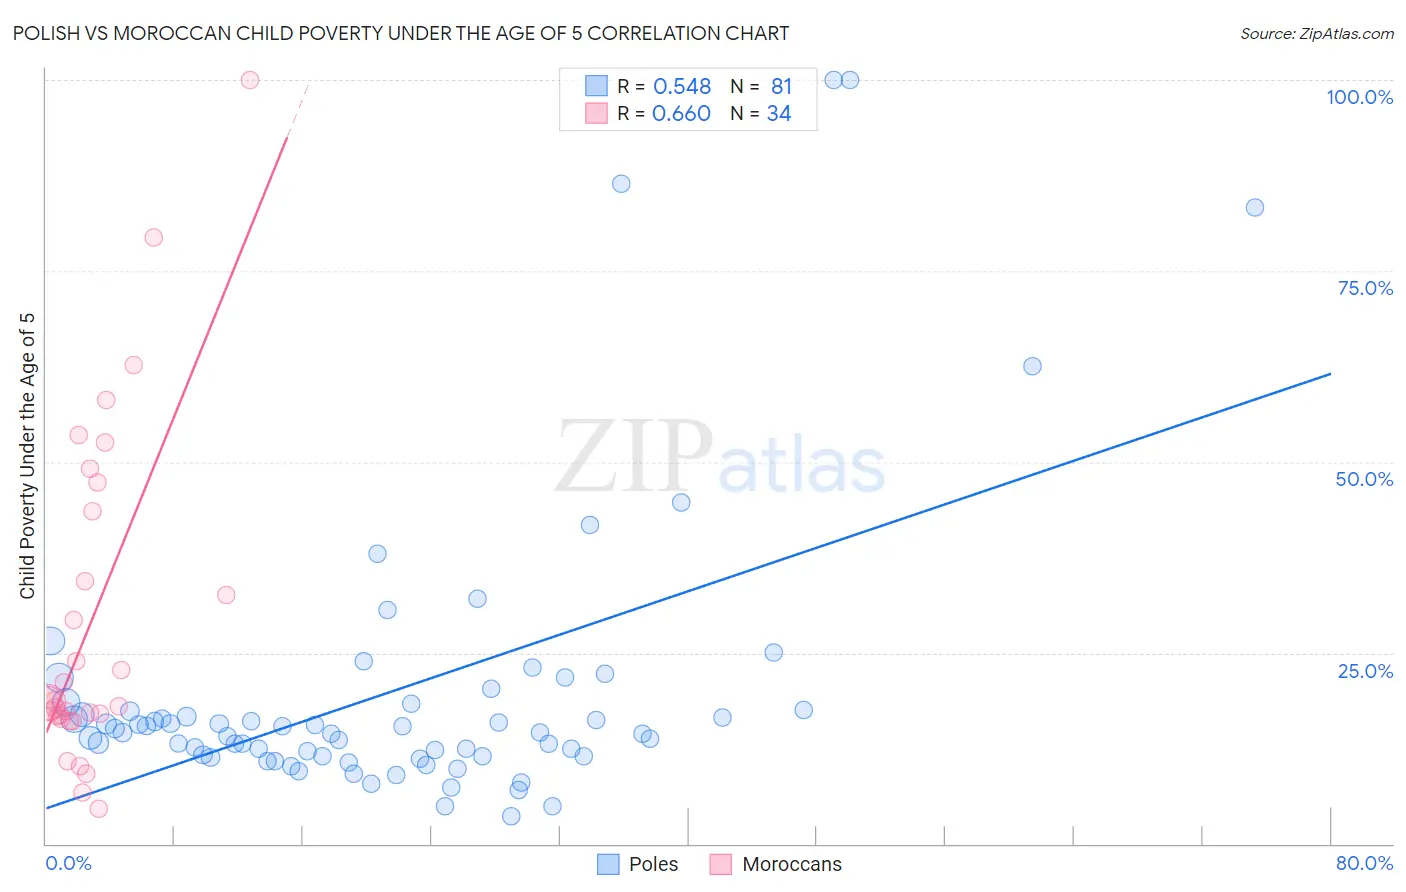 Polish vs Moroccan Child Poverty Under the Age of 5